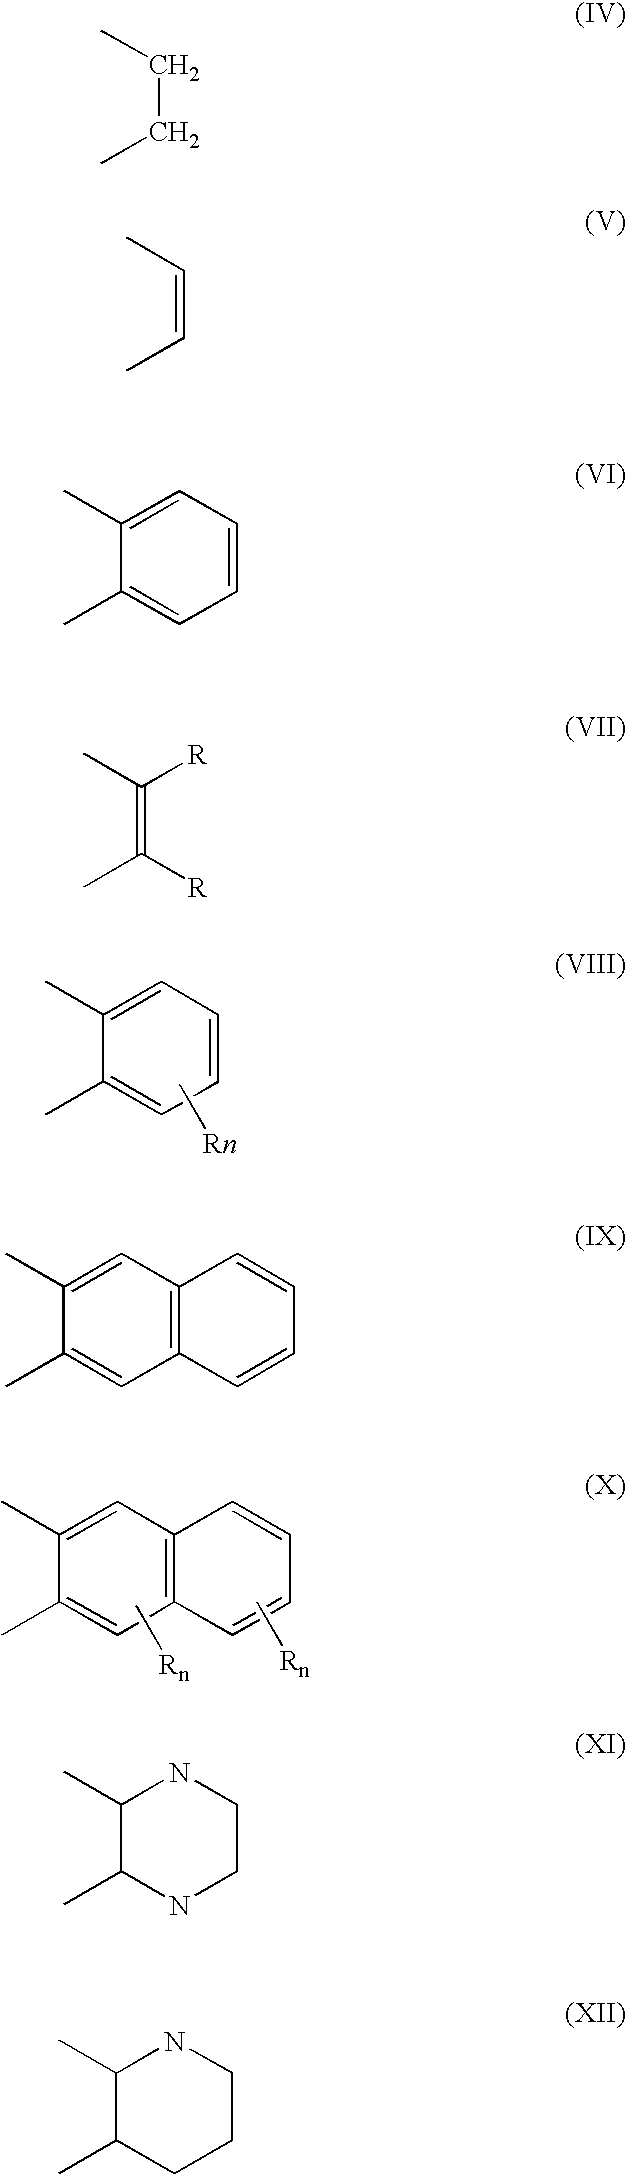 Process for the synthesis of unsaturated alcohols